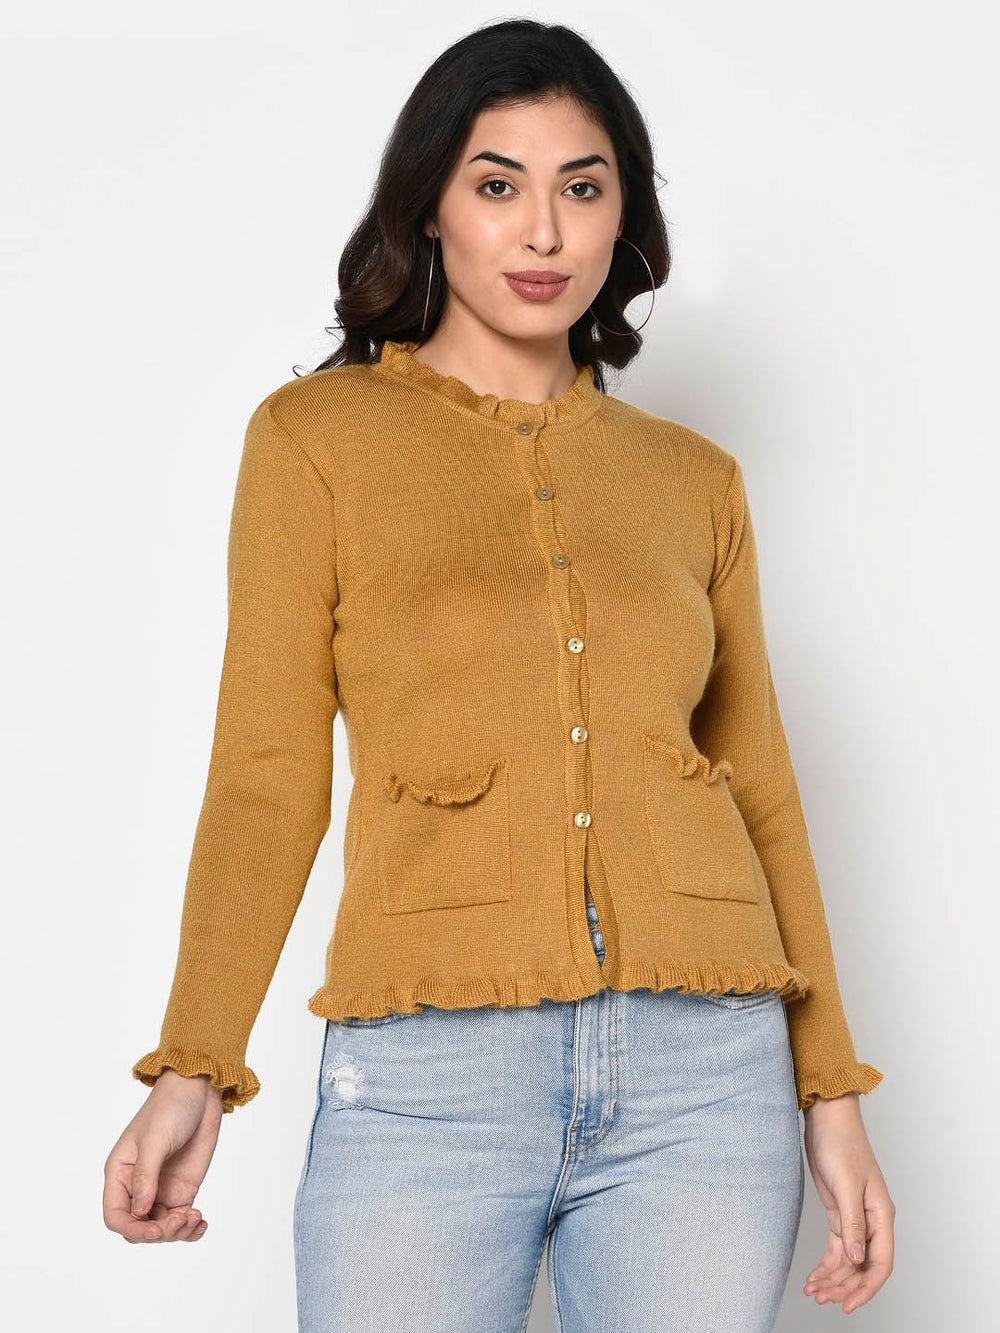 Mustard Acrylic Cardigan And Frill Detail